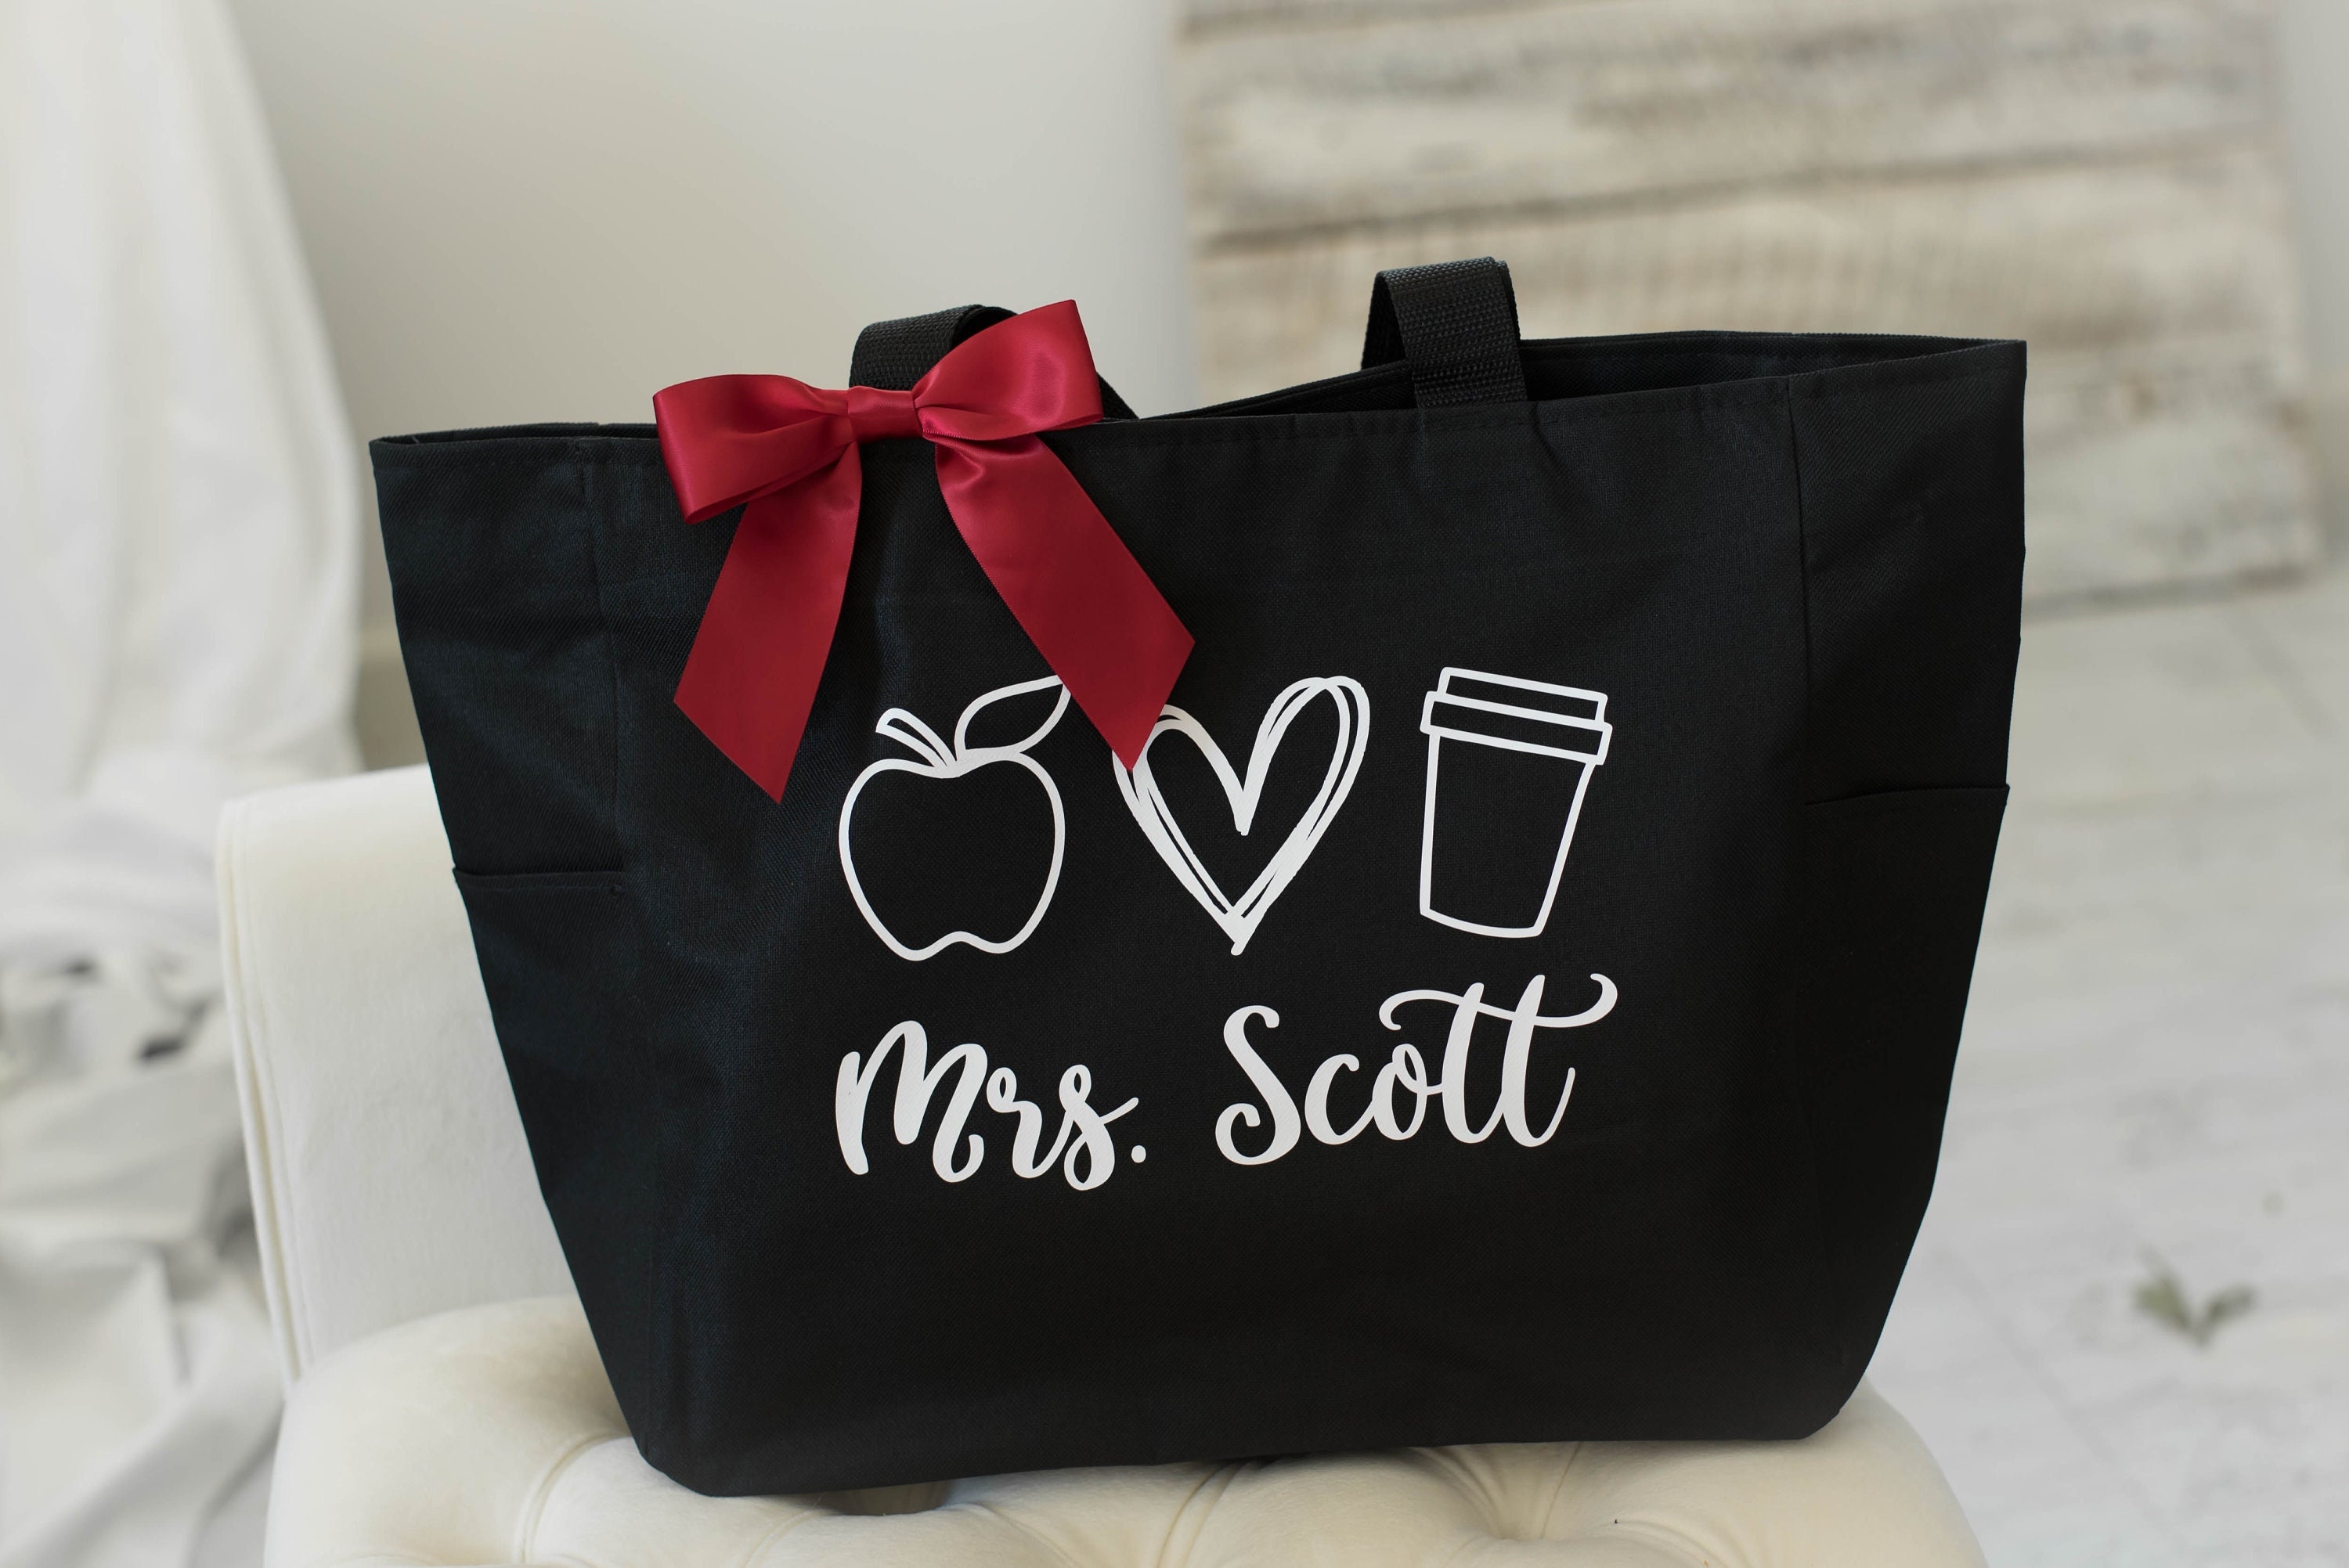 DIY personalized tote bags for kids - Today's Parent - Today's Parent